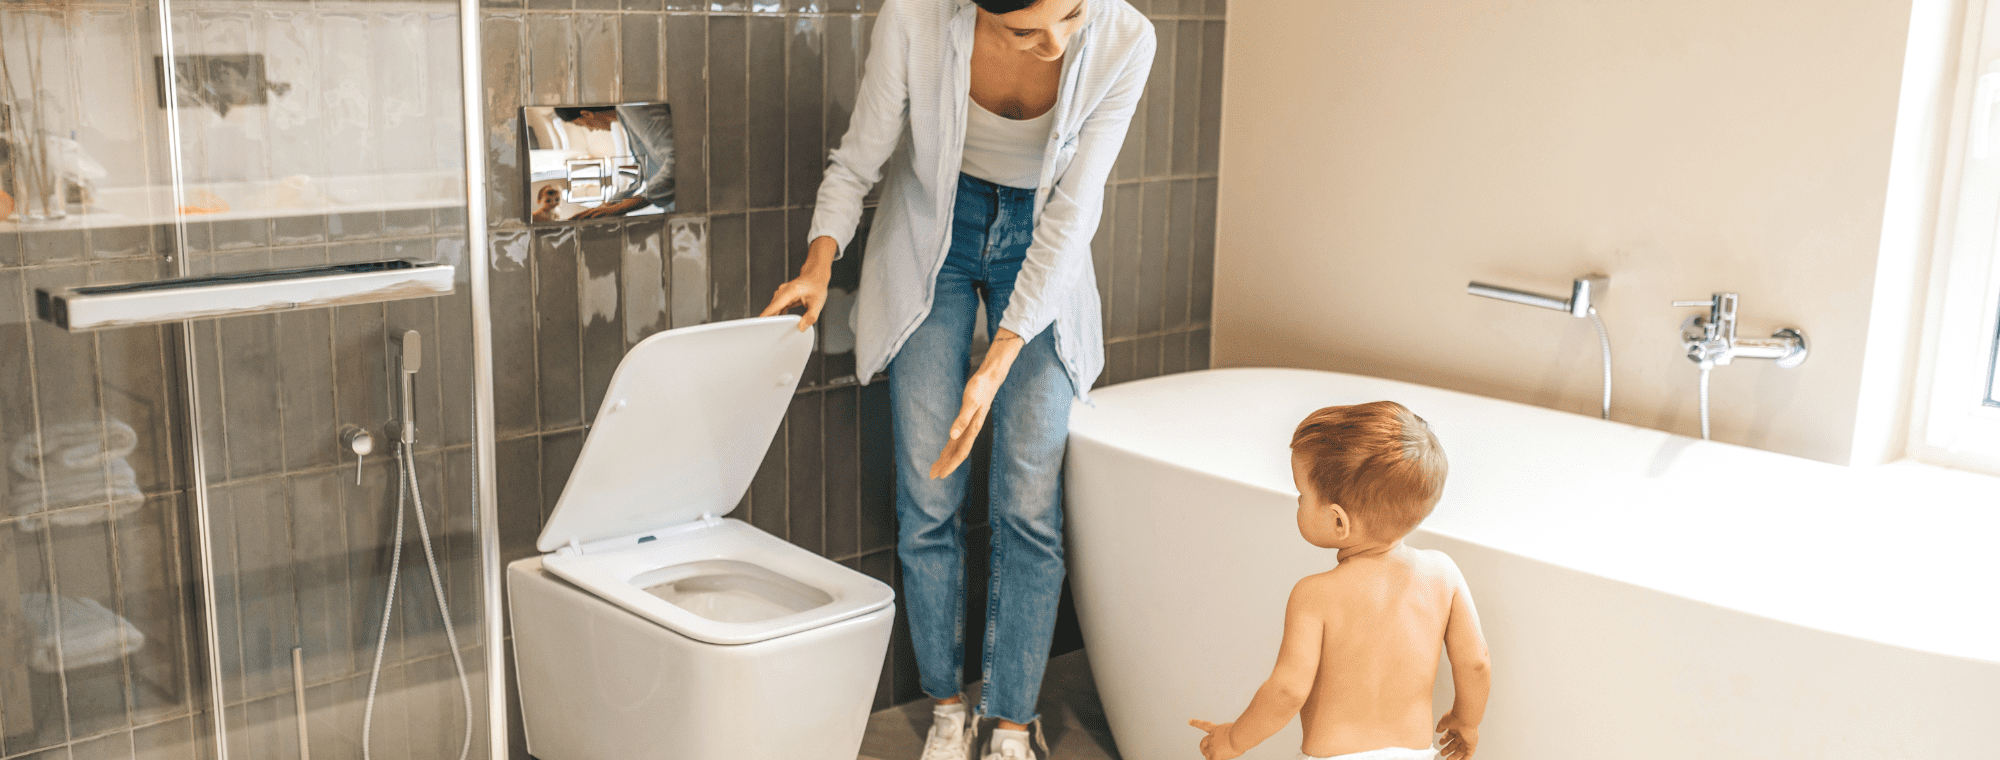 Toilet Training from Birth